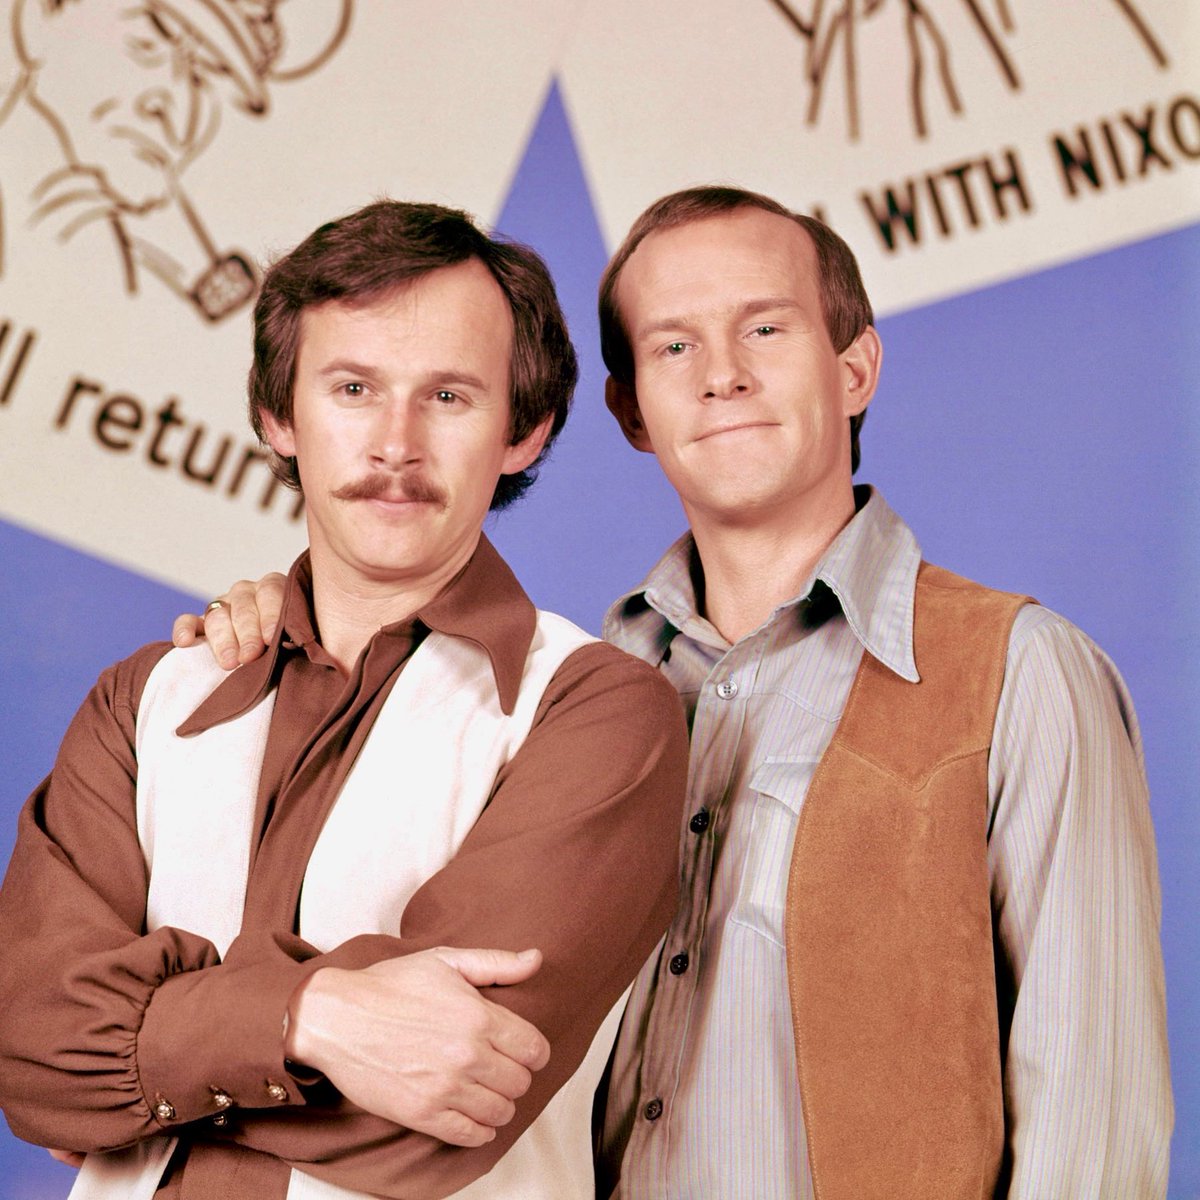 'The Smothers Brothers Comedy Hour' The Show That Changed TV